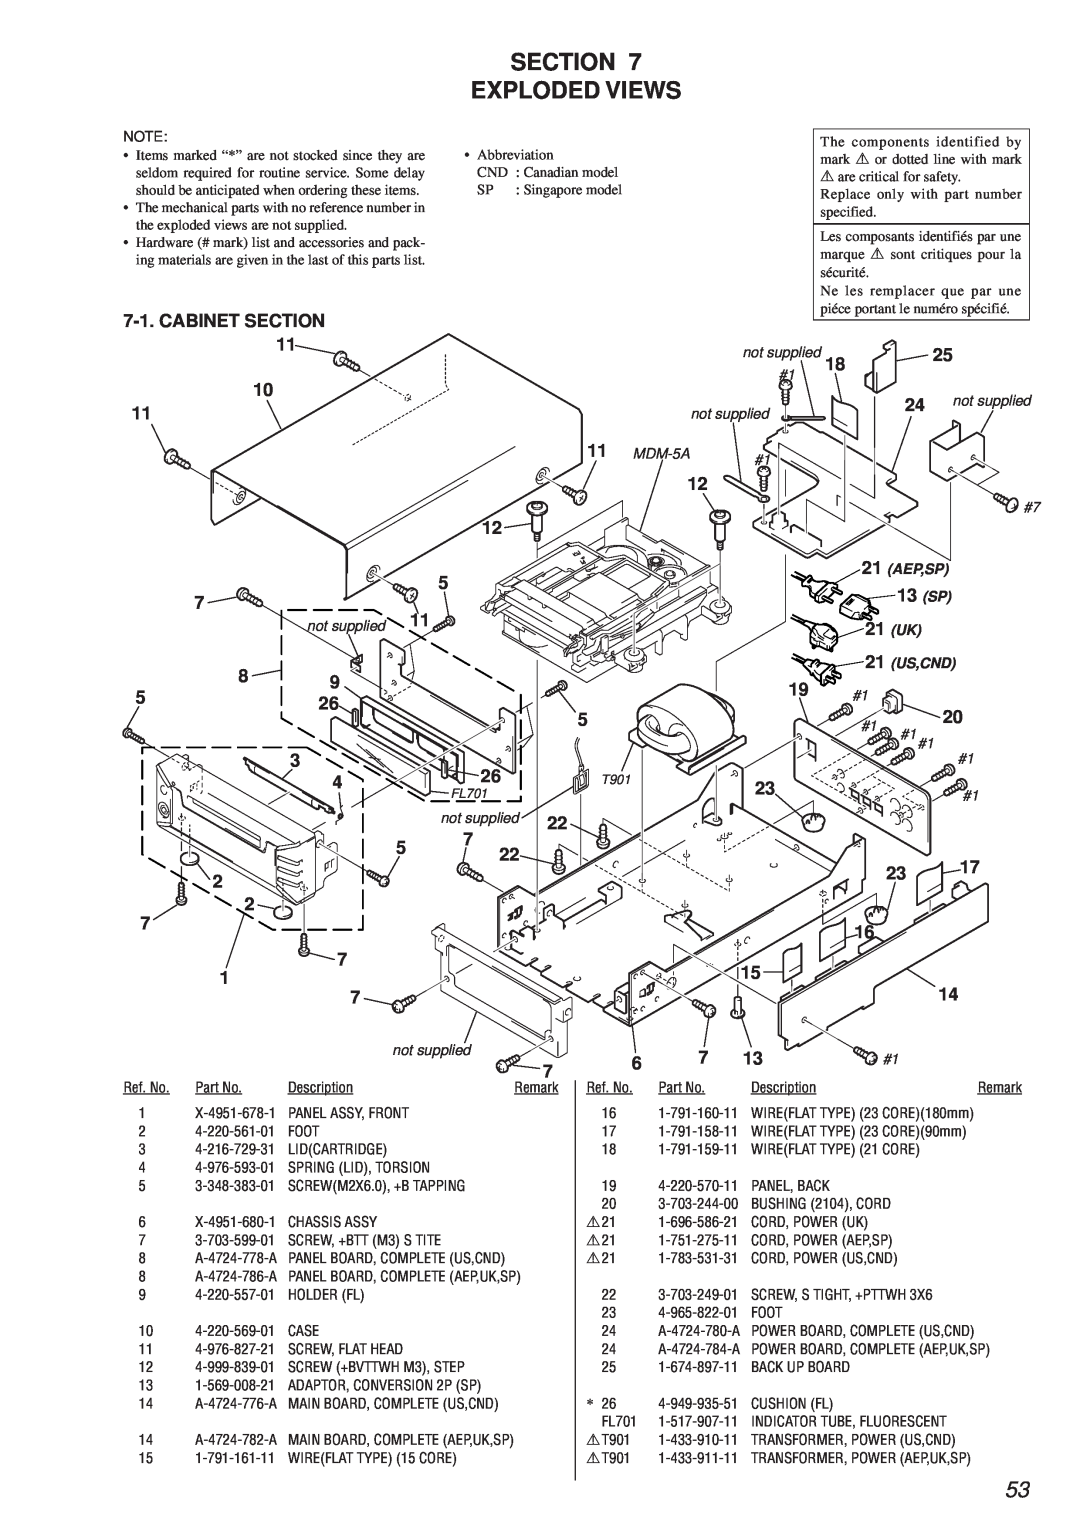 Sony MDS-PC2 service manual Section Exploded Views, Cabinet Section 